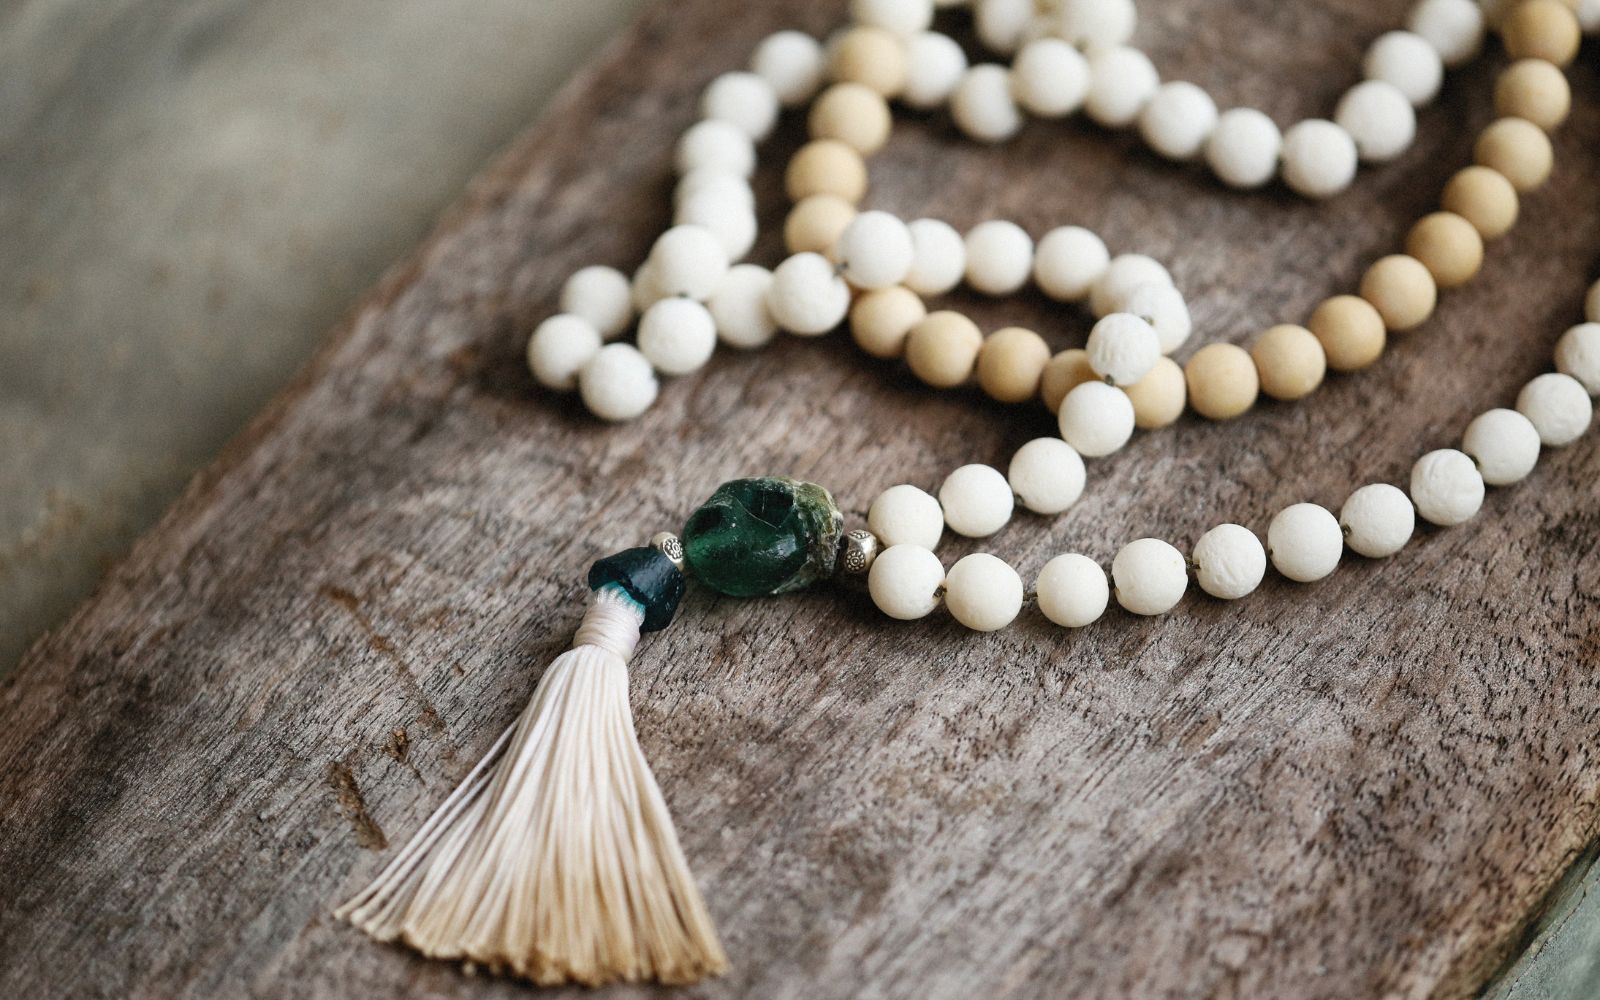 How To Buy Mala Beads As A Gift